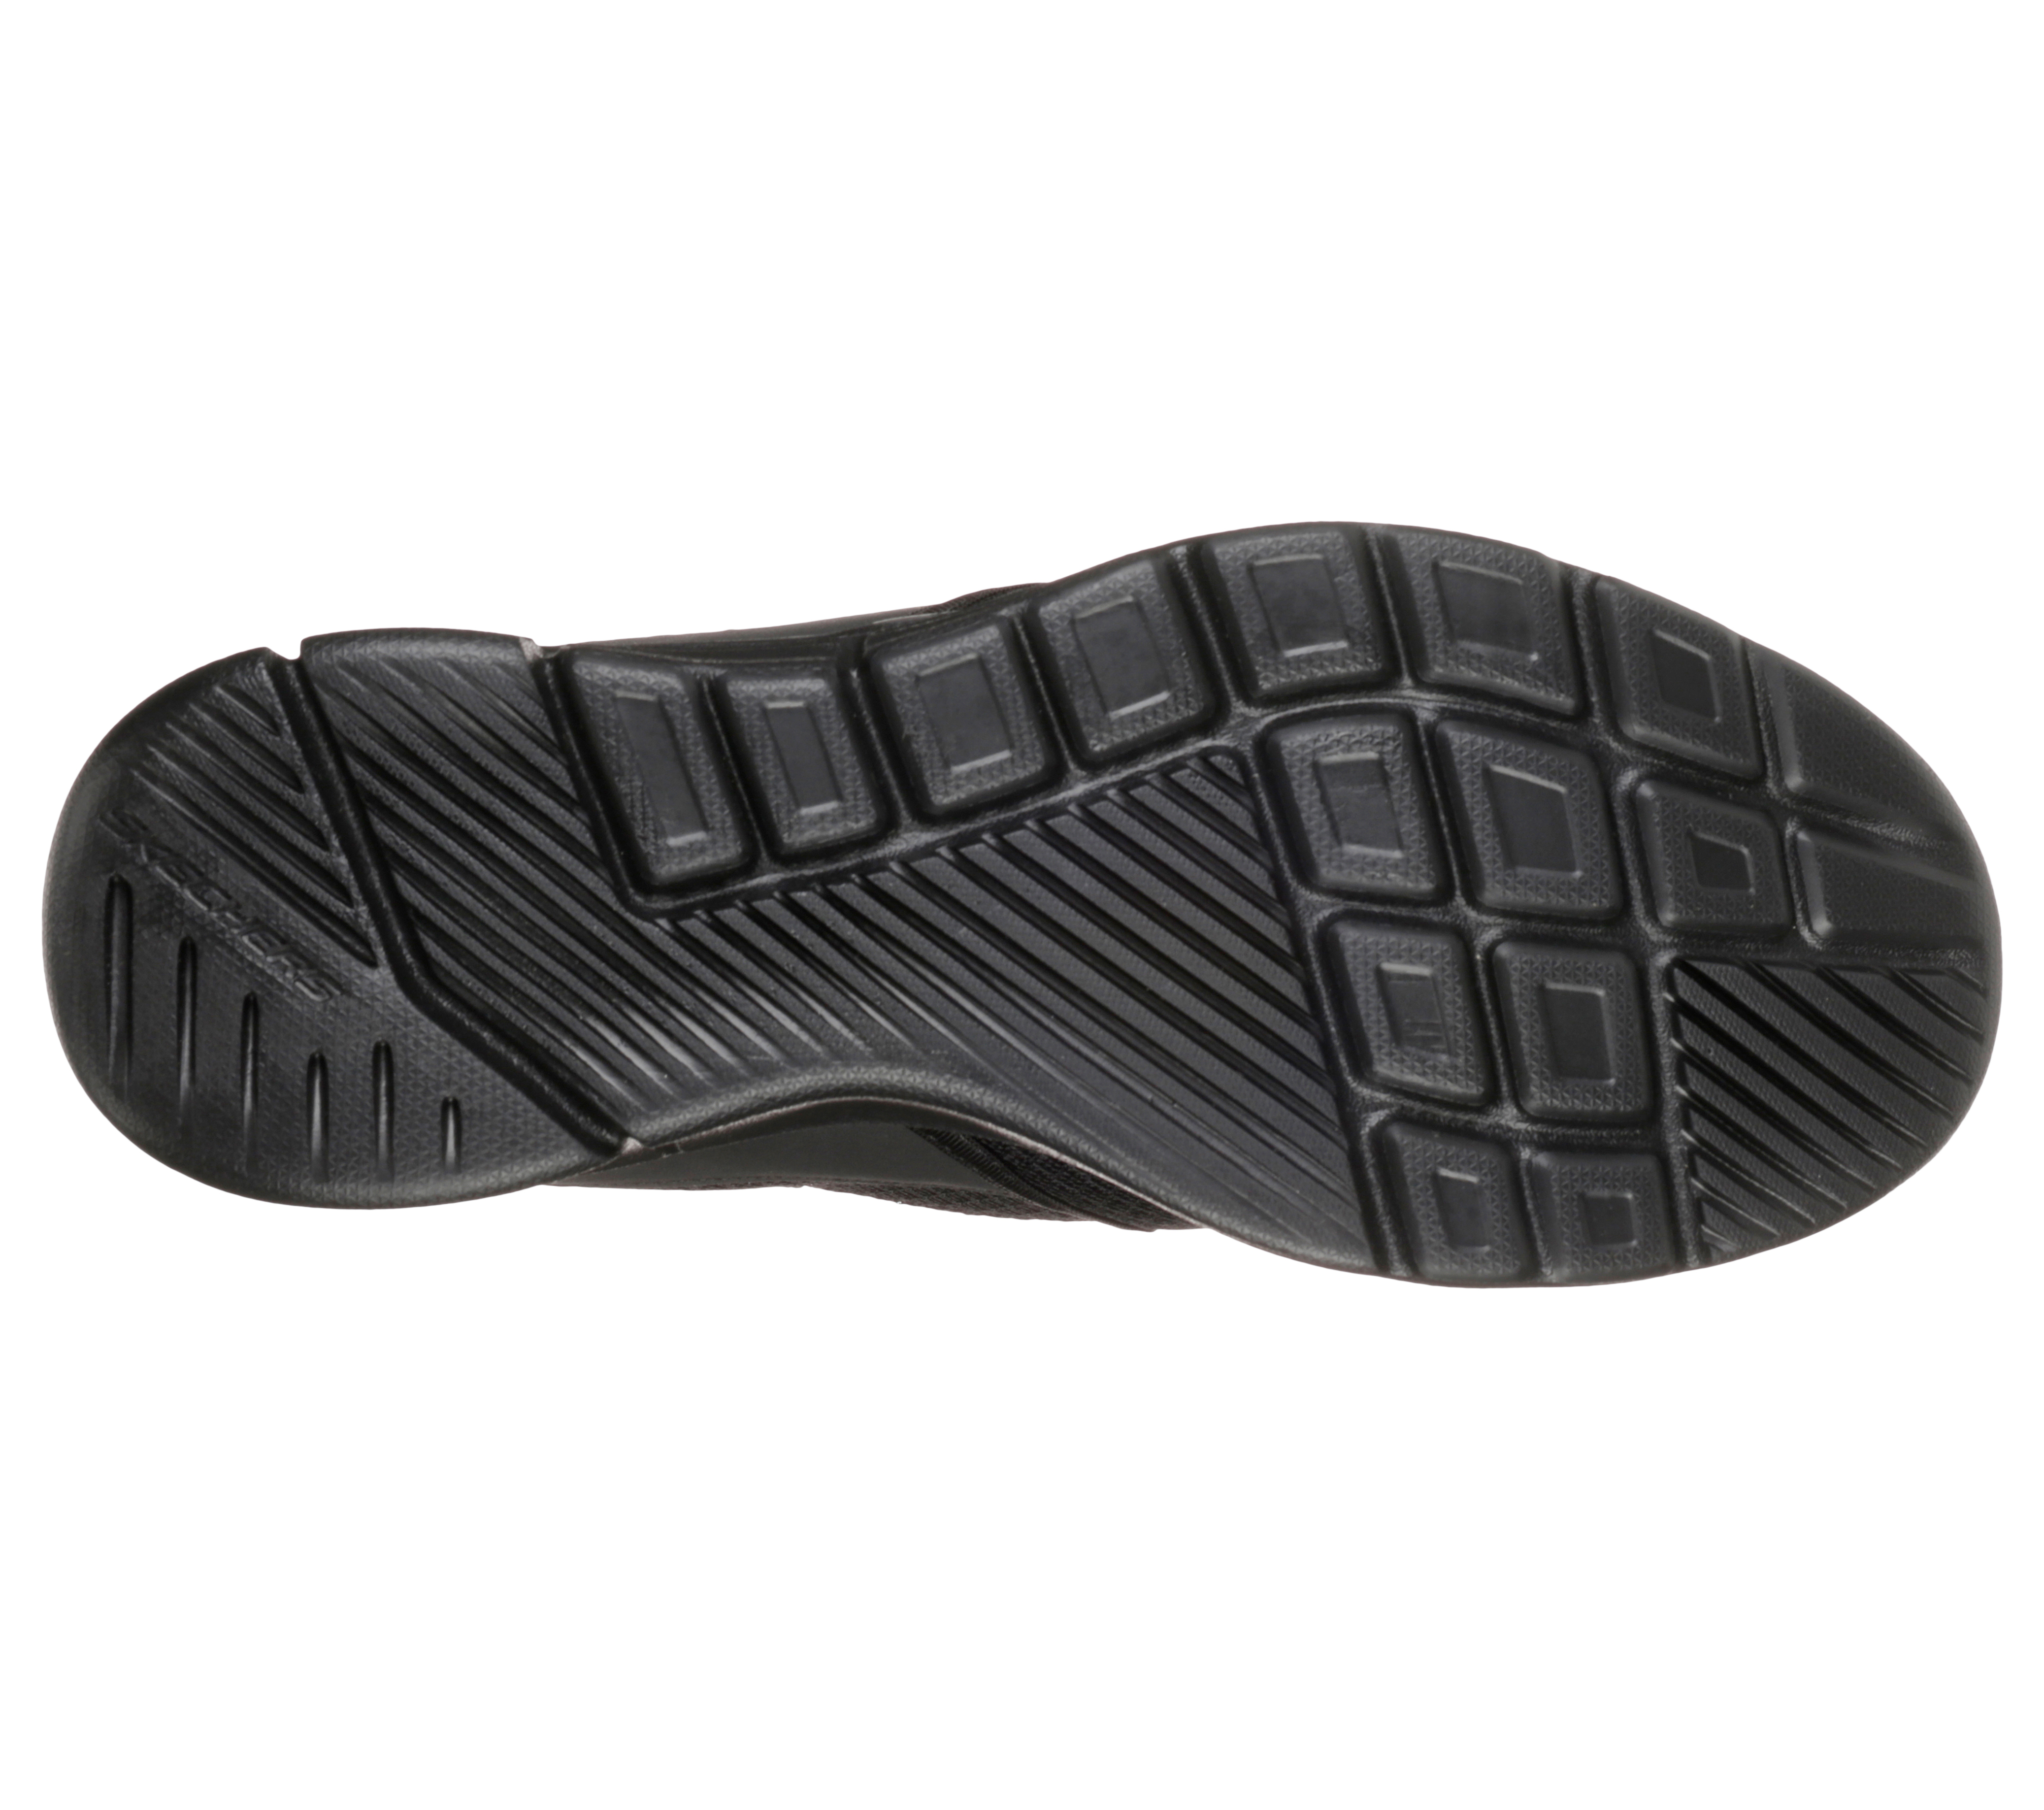 Relaxed Equalizer 3.0 - Bluegate | SKECHERS